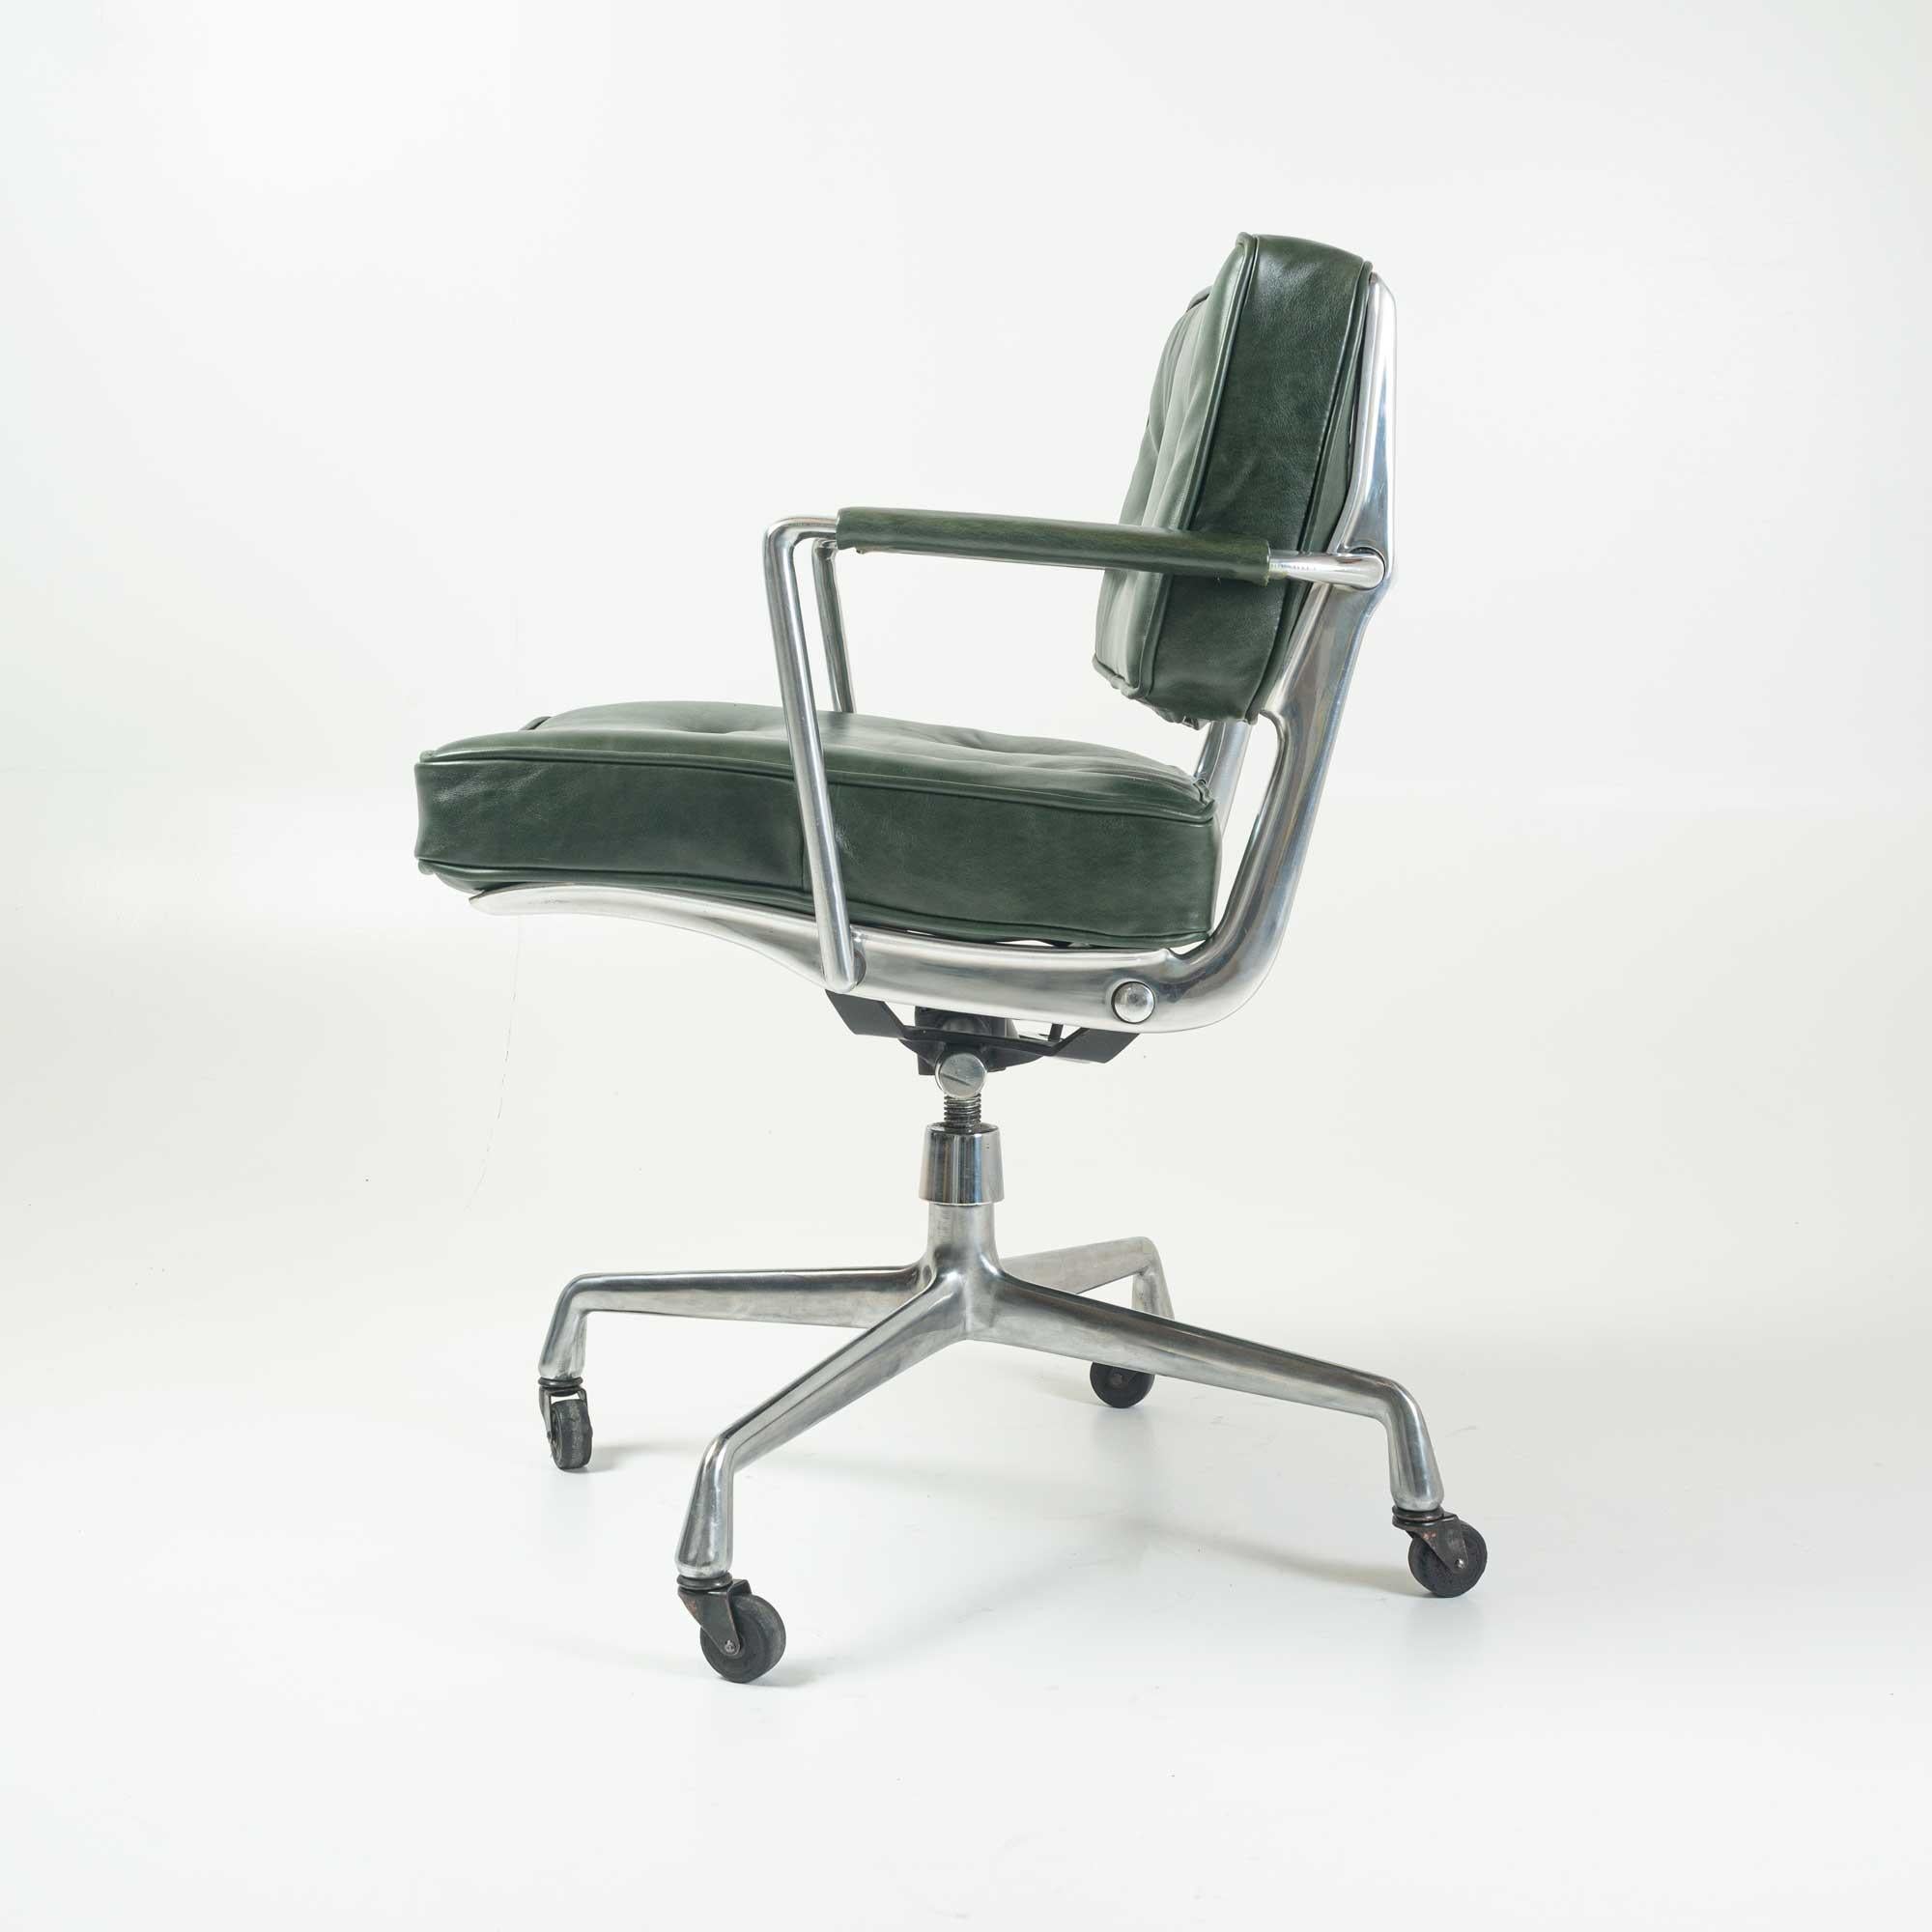 Mid-Century Modern Eames for Herman Miller Intermediate Chair in British Racing Green Leather